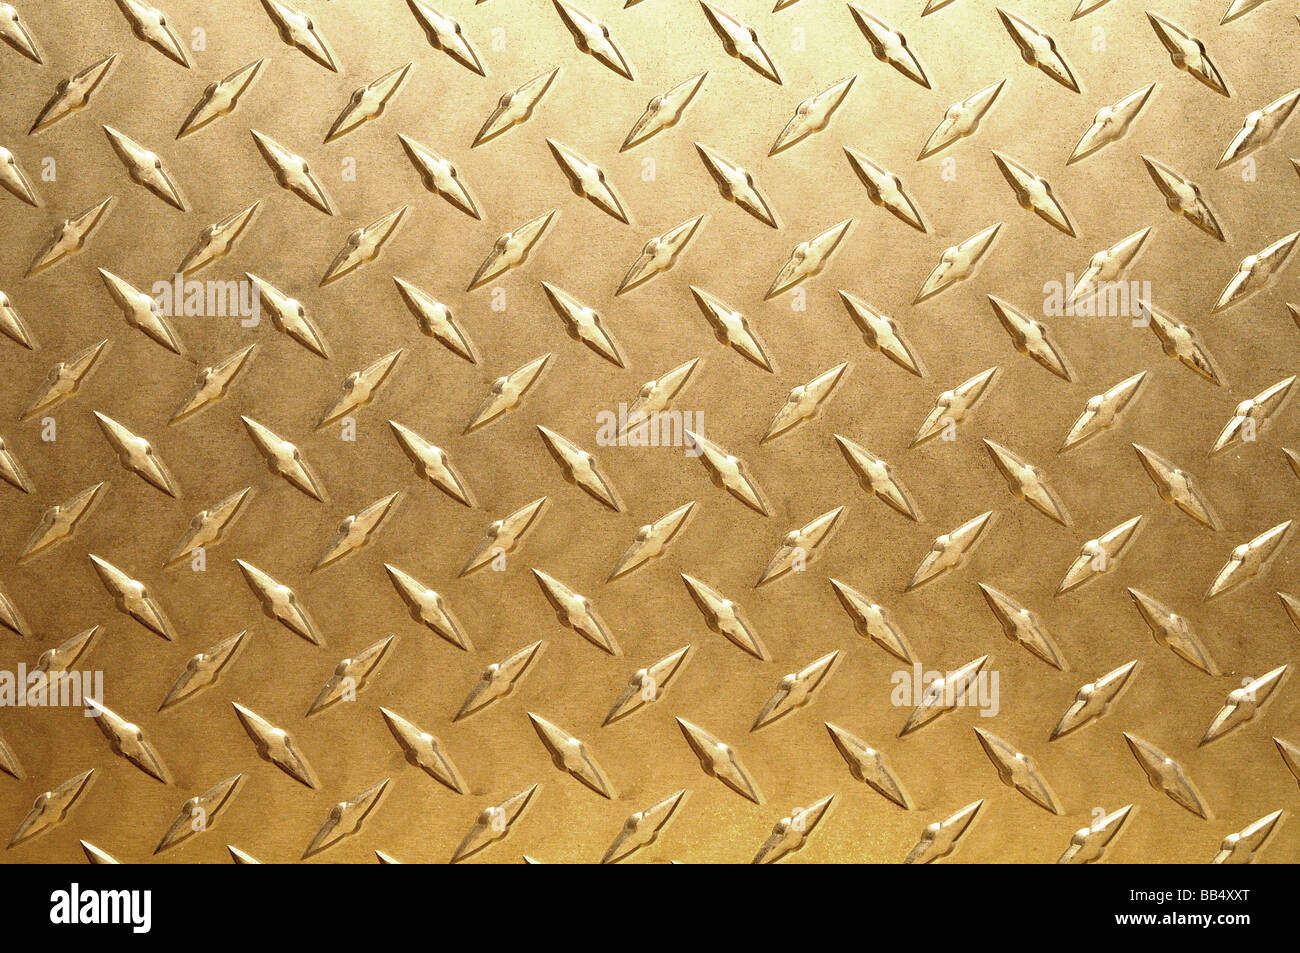 Diamond plate steel background. Commonly used as a tread pattern or covering of bumpers and tool boxes Stock Photo